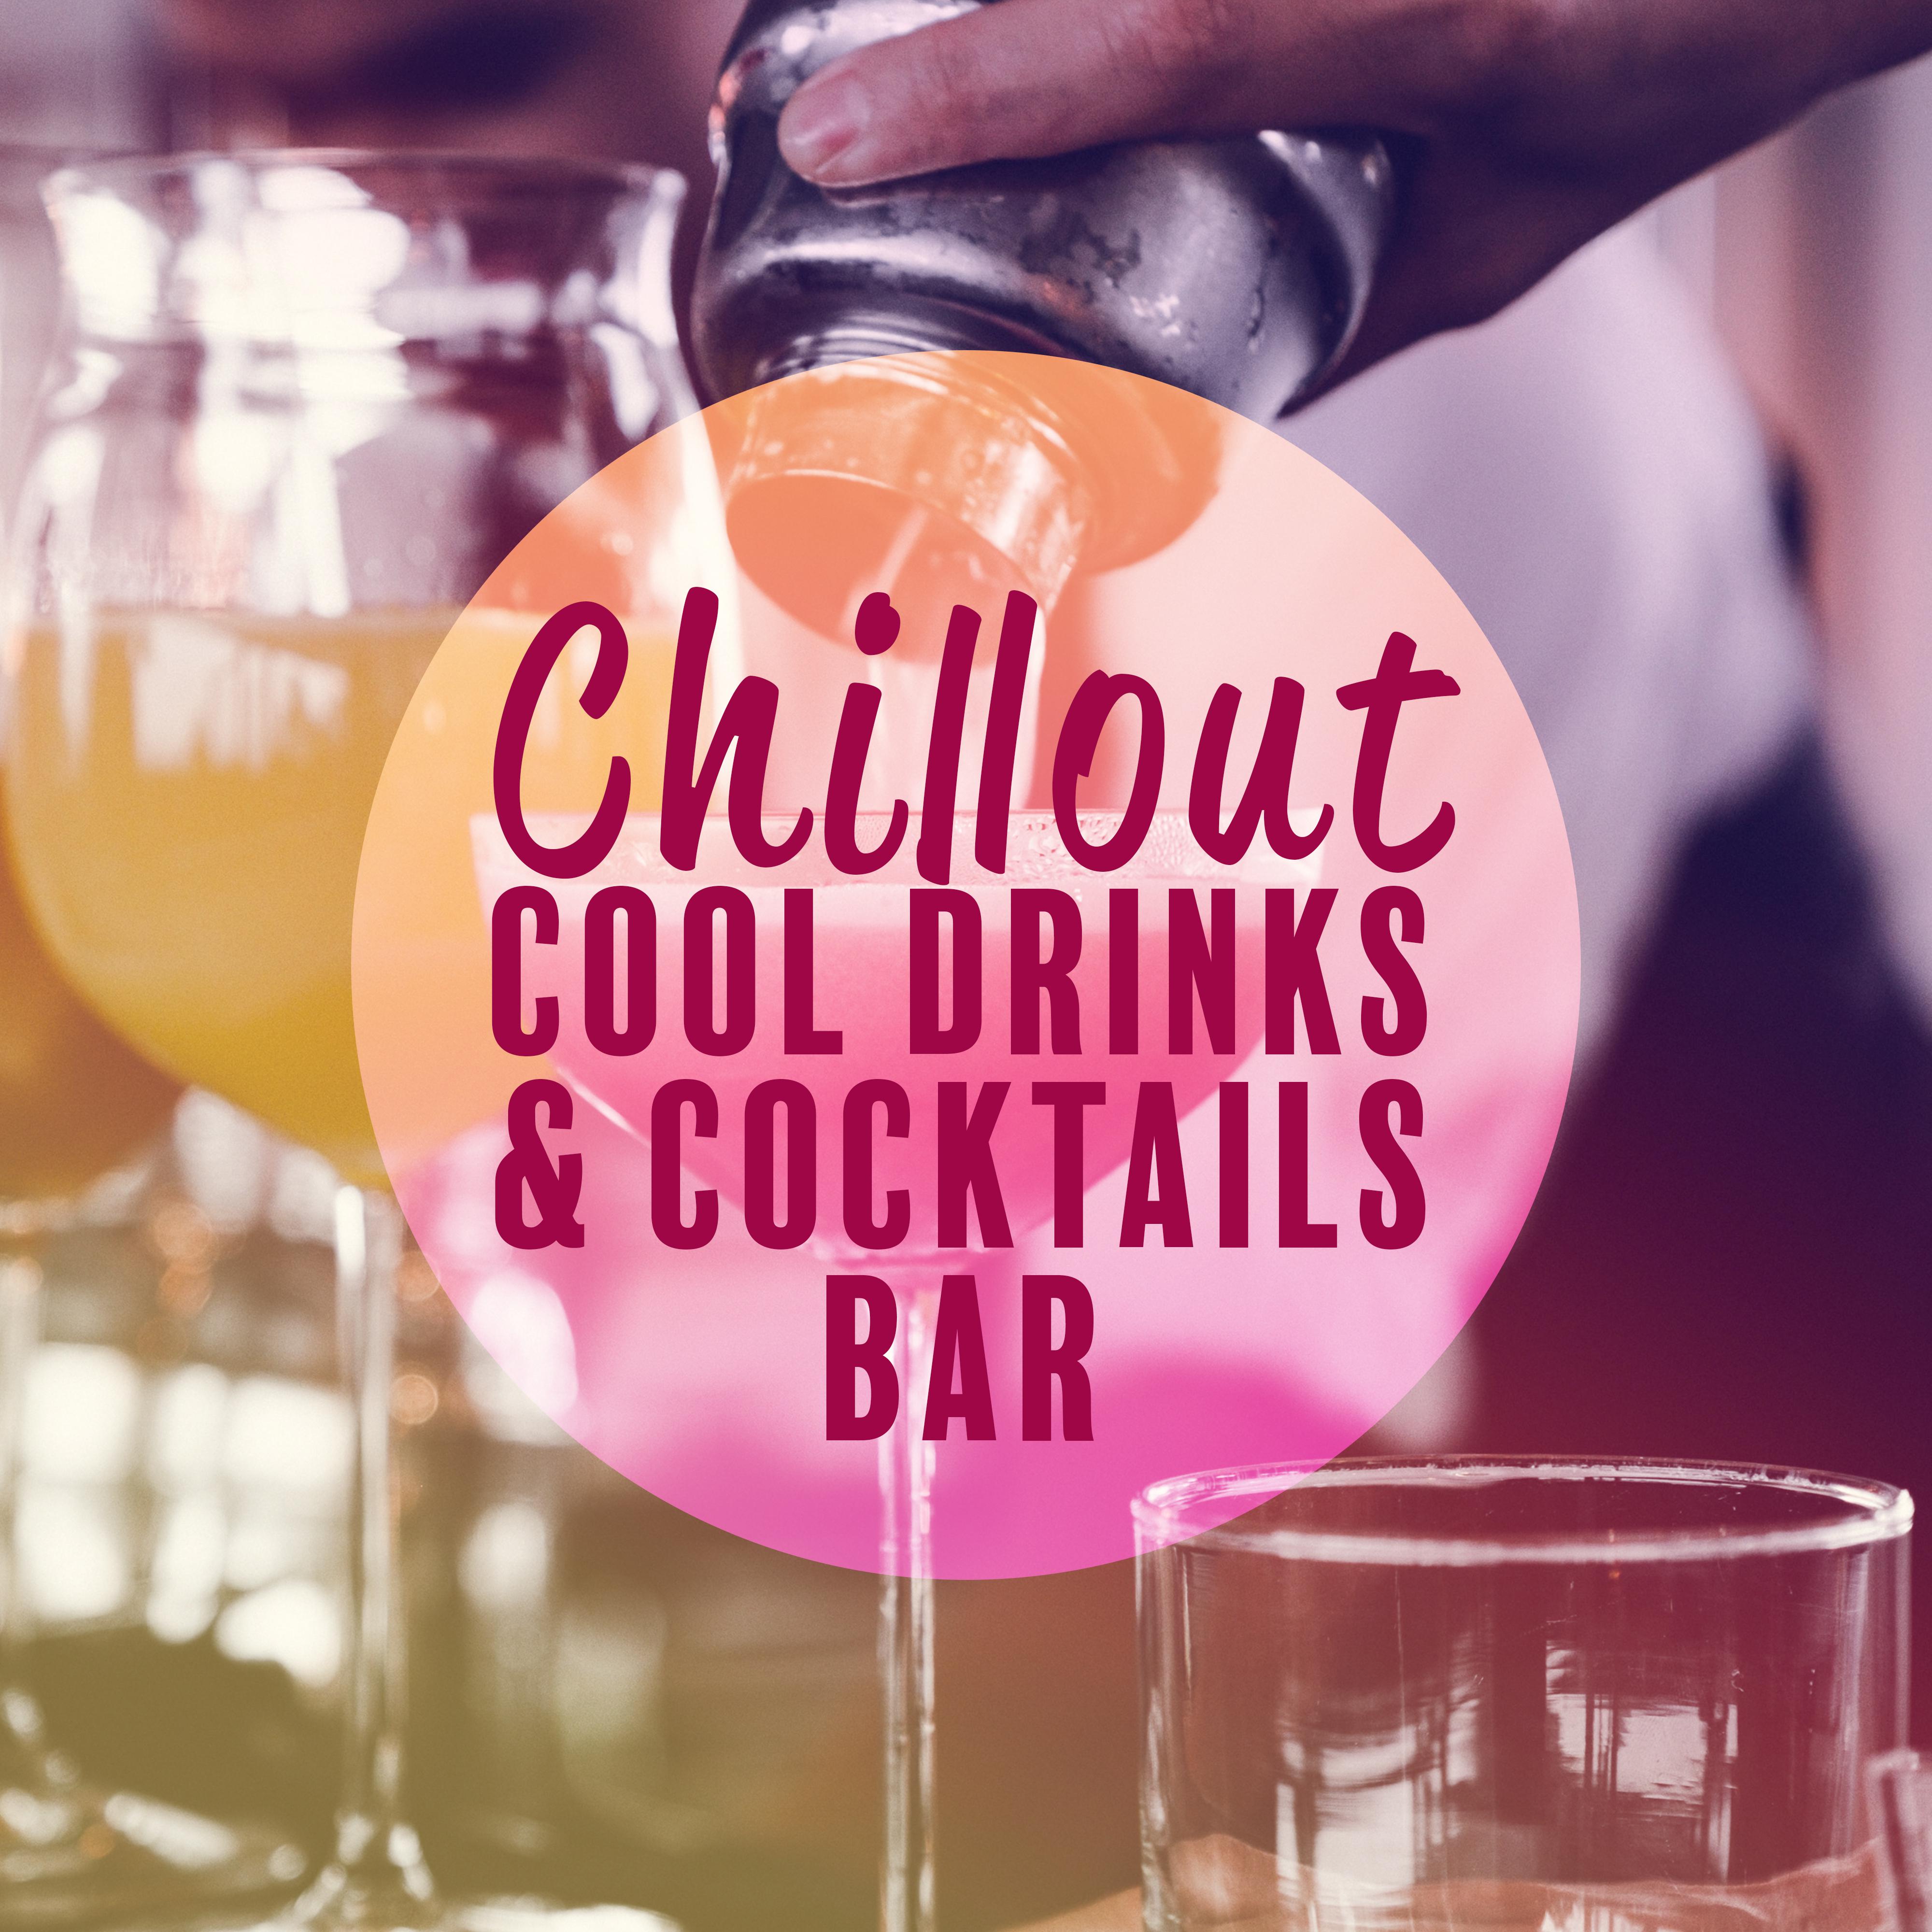 Chillout Cool Drinks  Cocktails Bar  Sunny Beach Electronic Beats Compilation for Total Holiday Relax